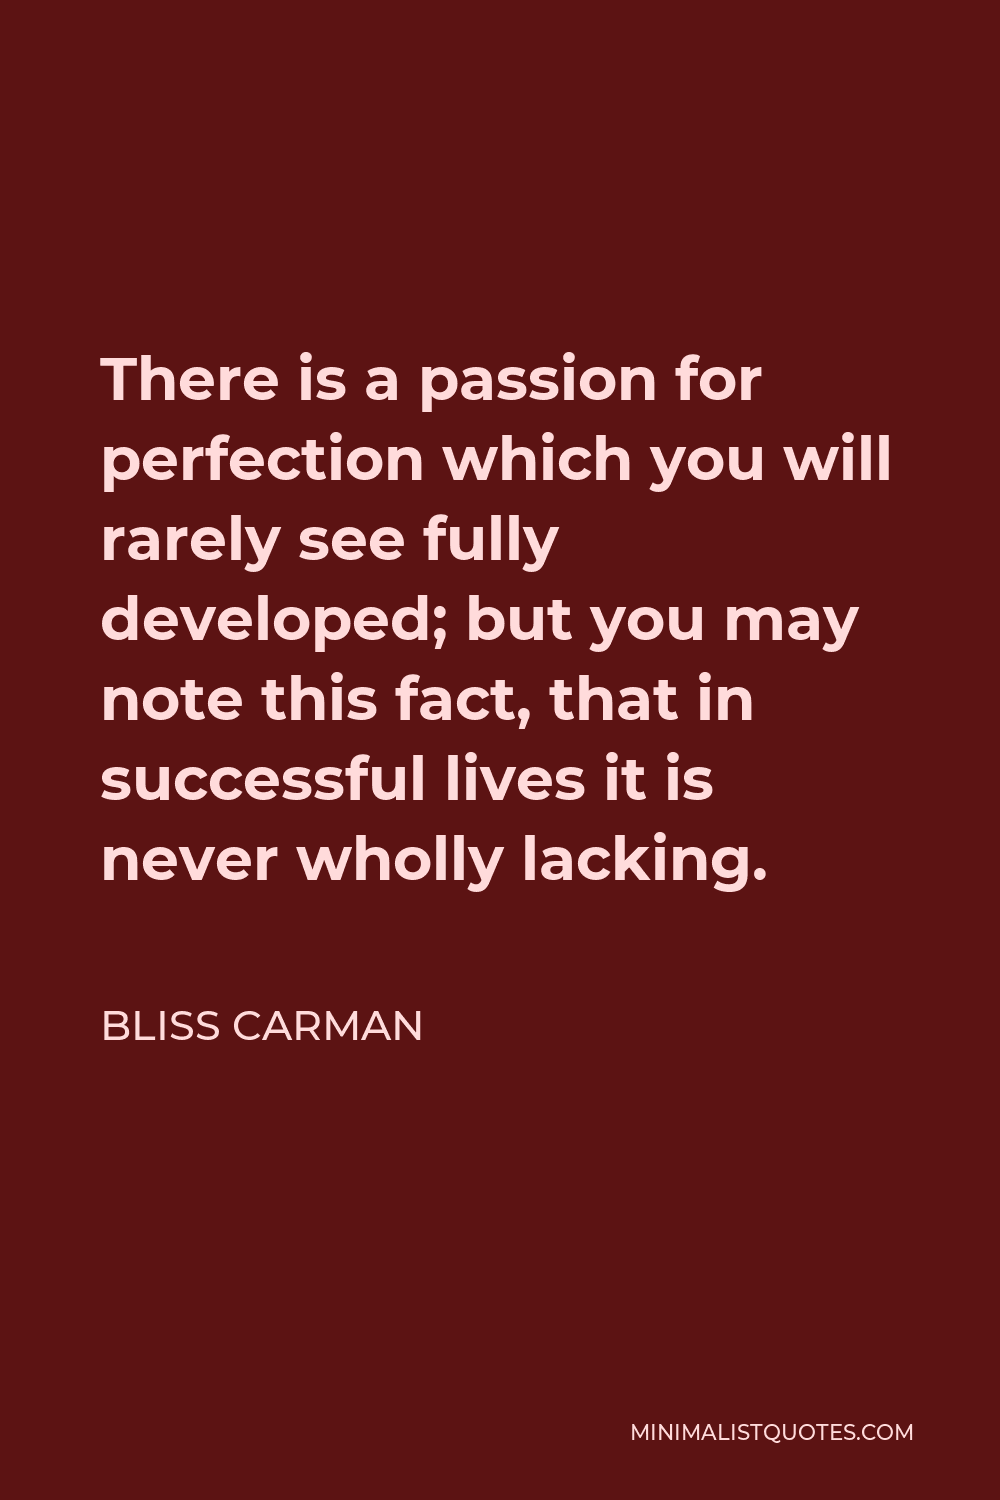 Bliss Carman Quote - There is a passion for perfection which you will rarely see fully developed; but you may note this fact, that in successful lives it is never wholly lacking.